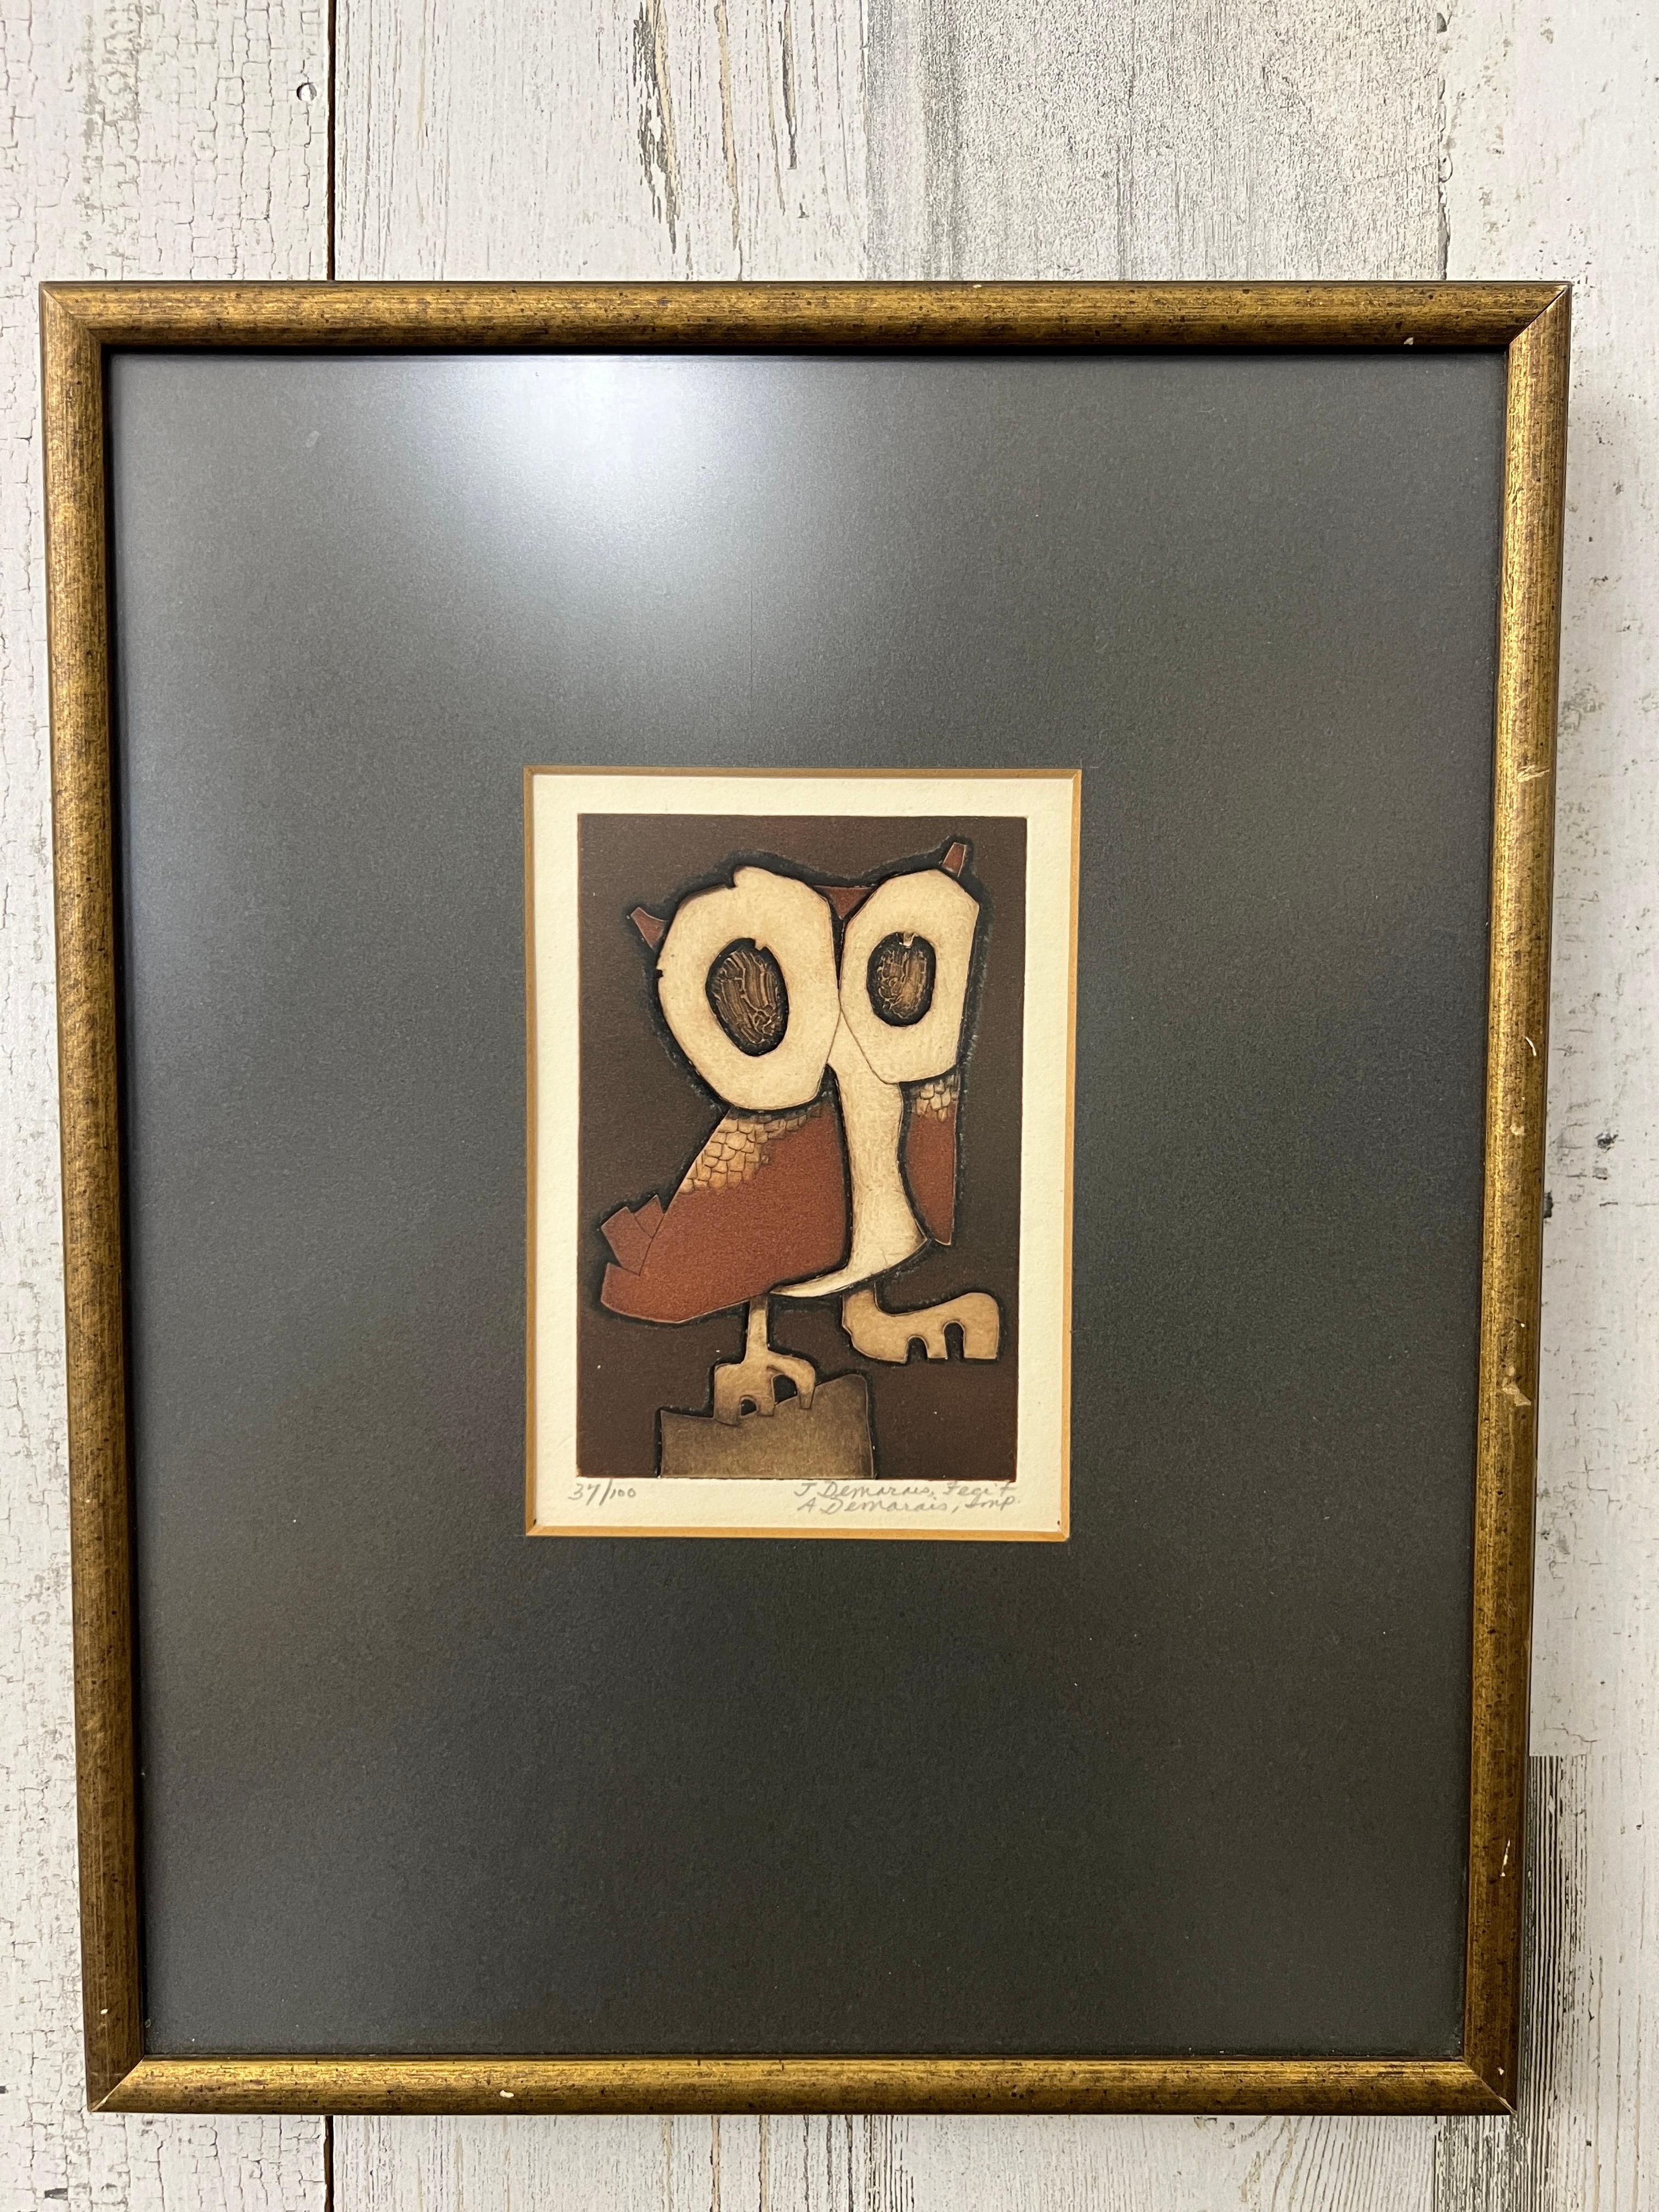 Joseph Demarais Limited Edition Owl Print- Signed. This artist has very unique designs thats he is well known for. He developed an influential process for creating dimensional intaglio-relief prints, building up the surface of the zinc, copper,